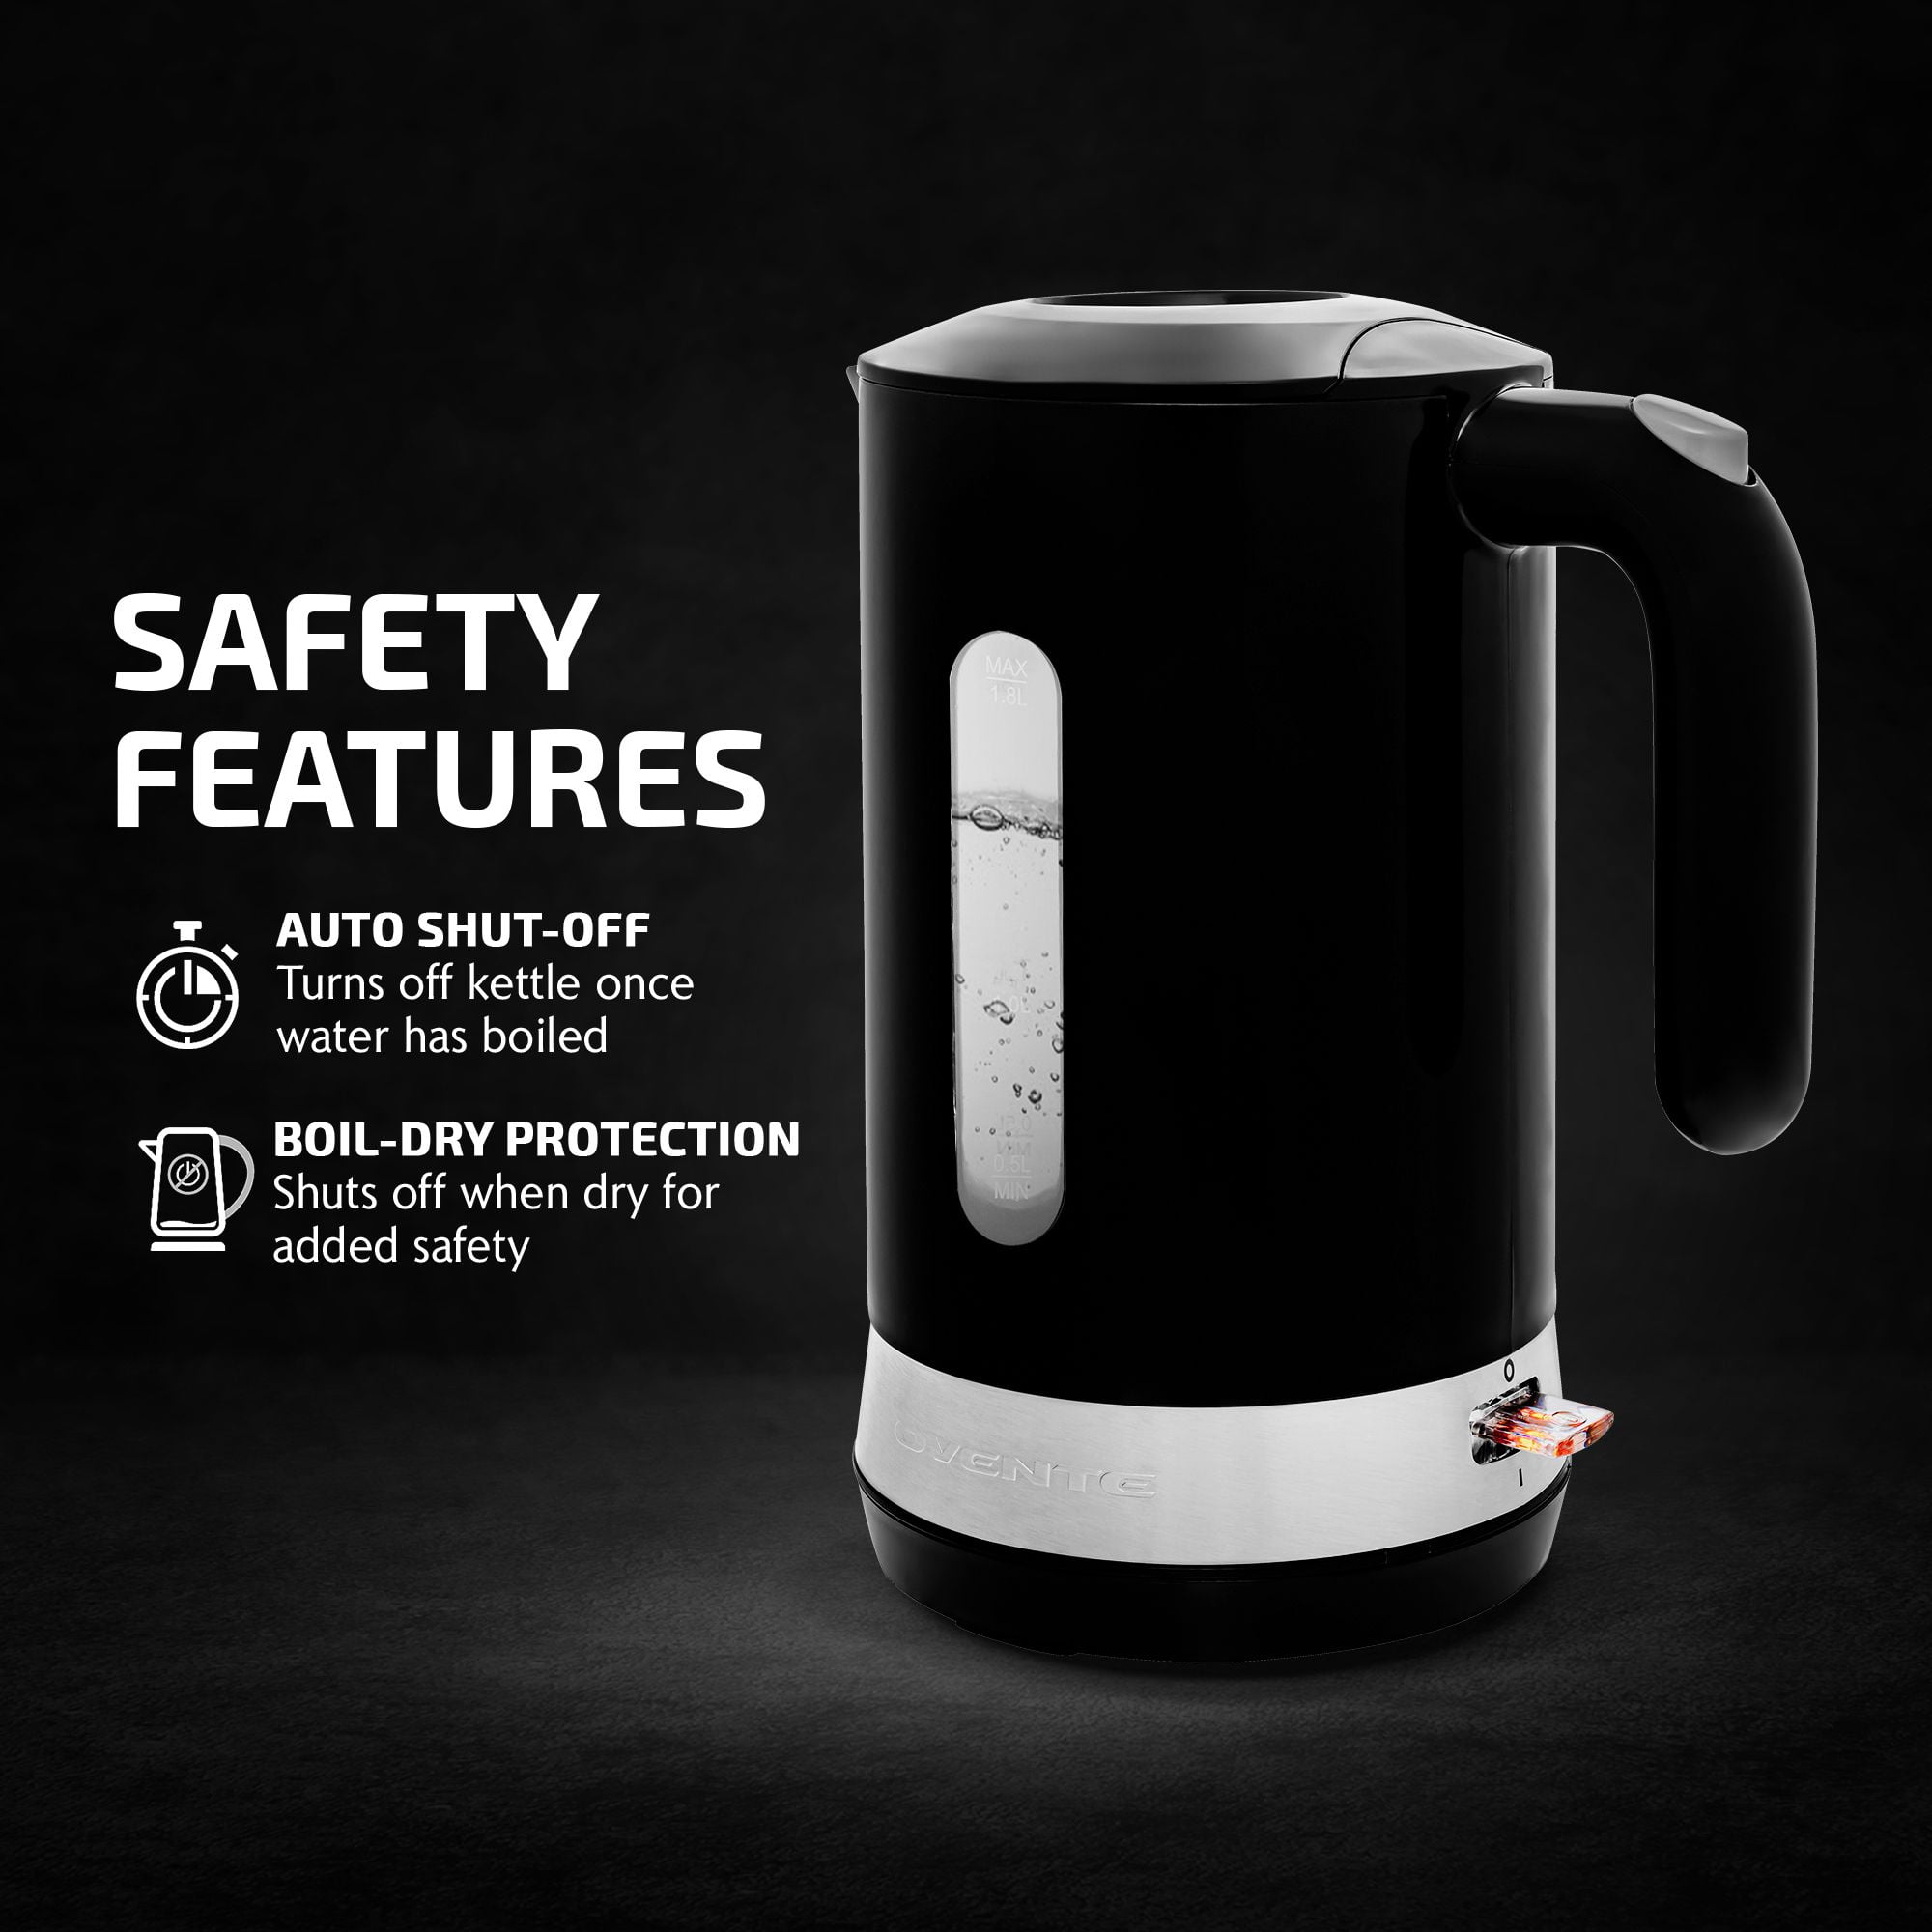 Ovente Electric Hot Water Kettle 1.8 Liter Prontofill Lid 1500W BPA-Free  Portable Countertop Tea Coffee